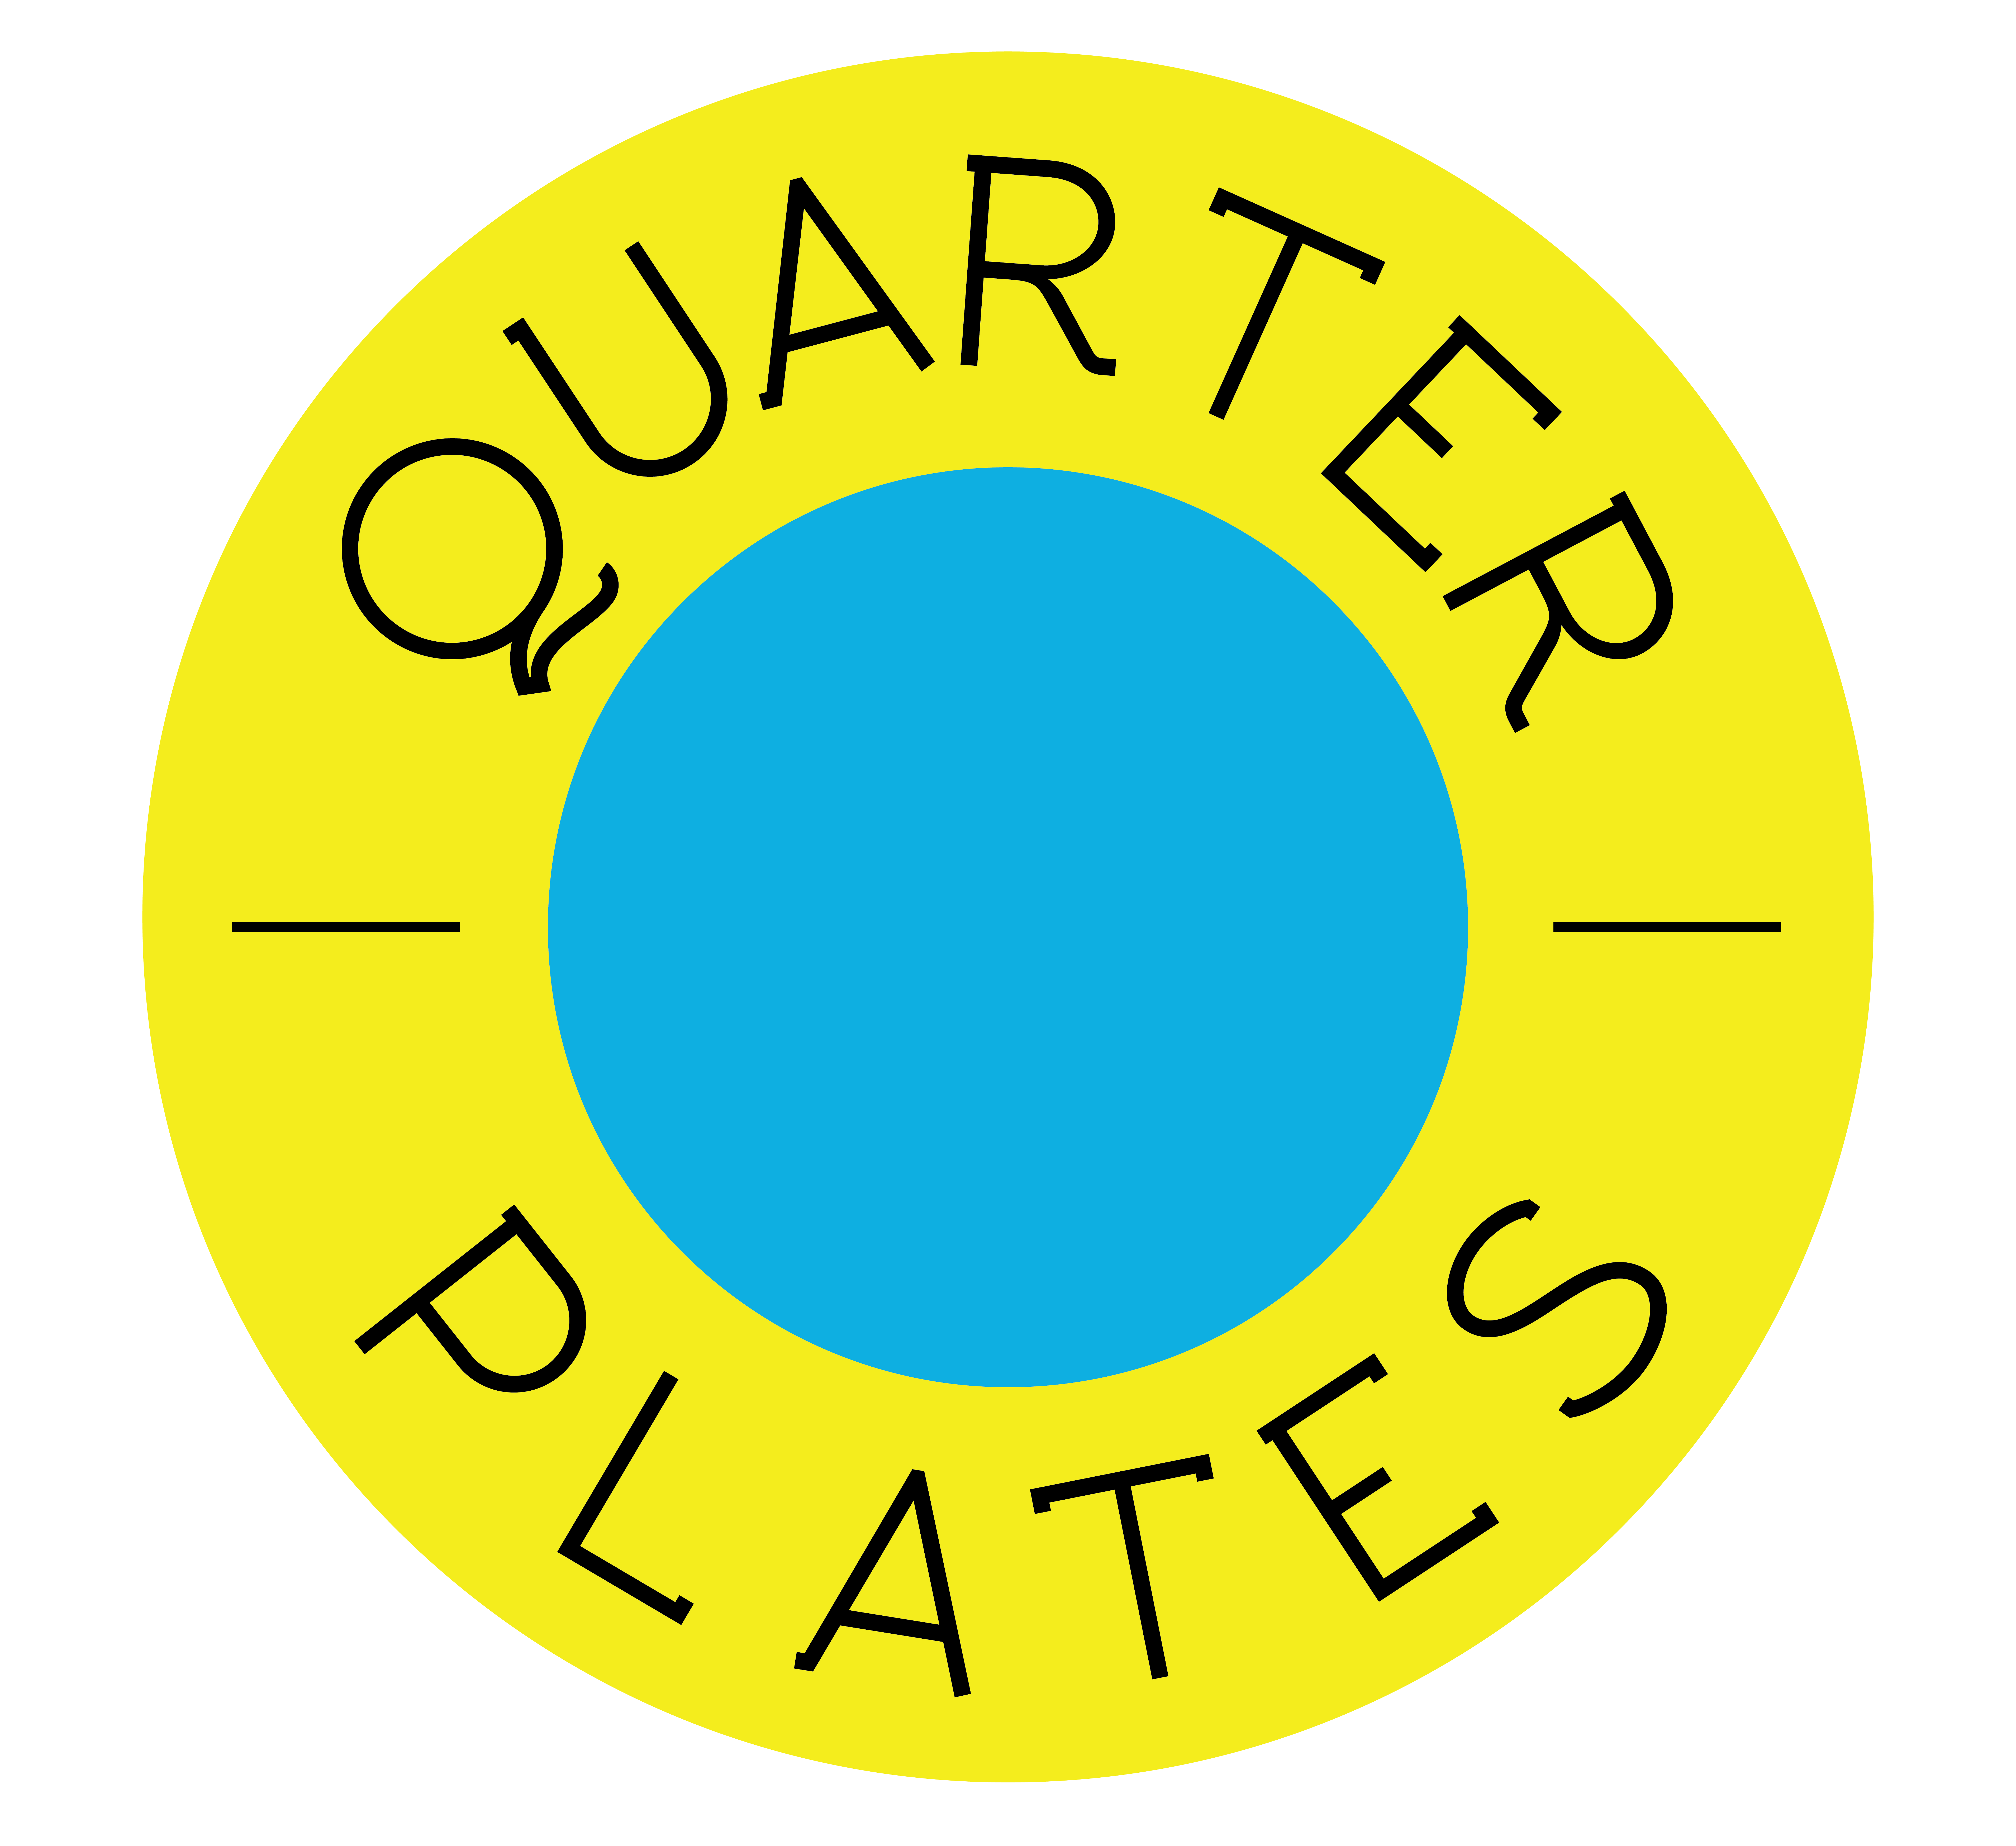 dish clipart yellow plate